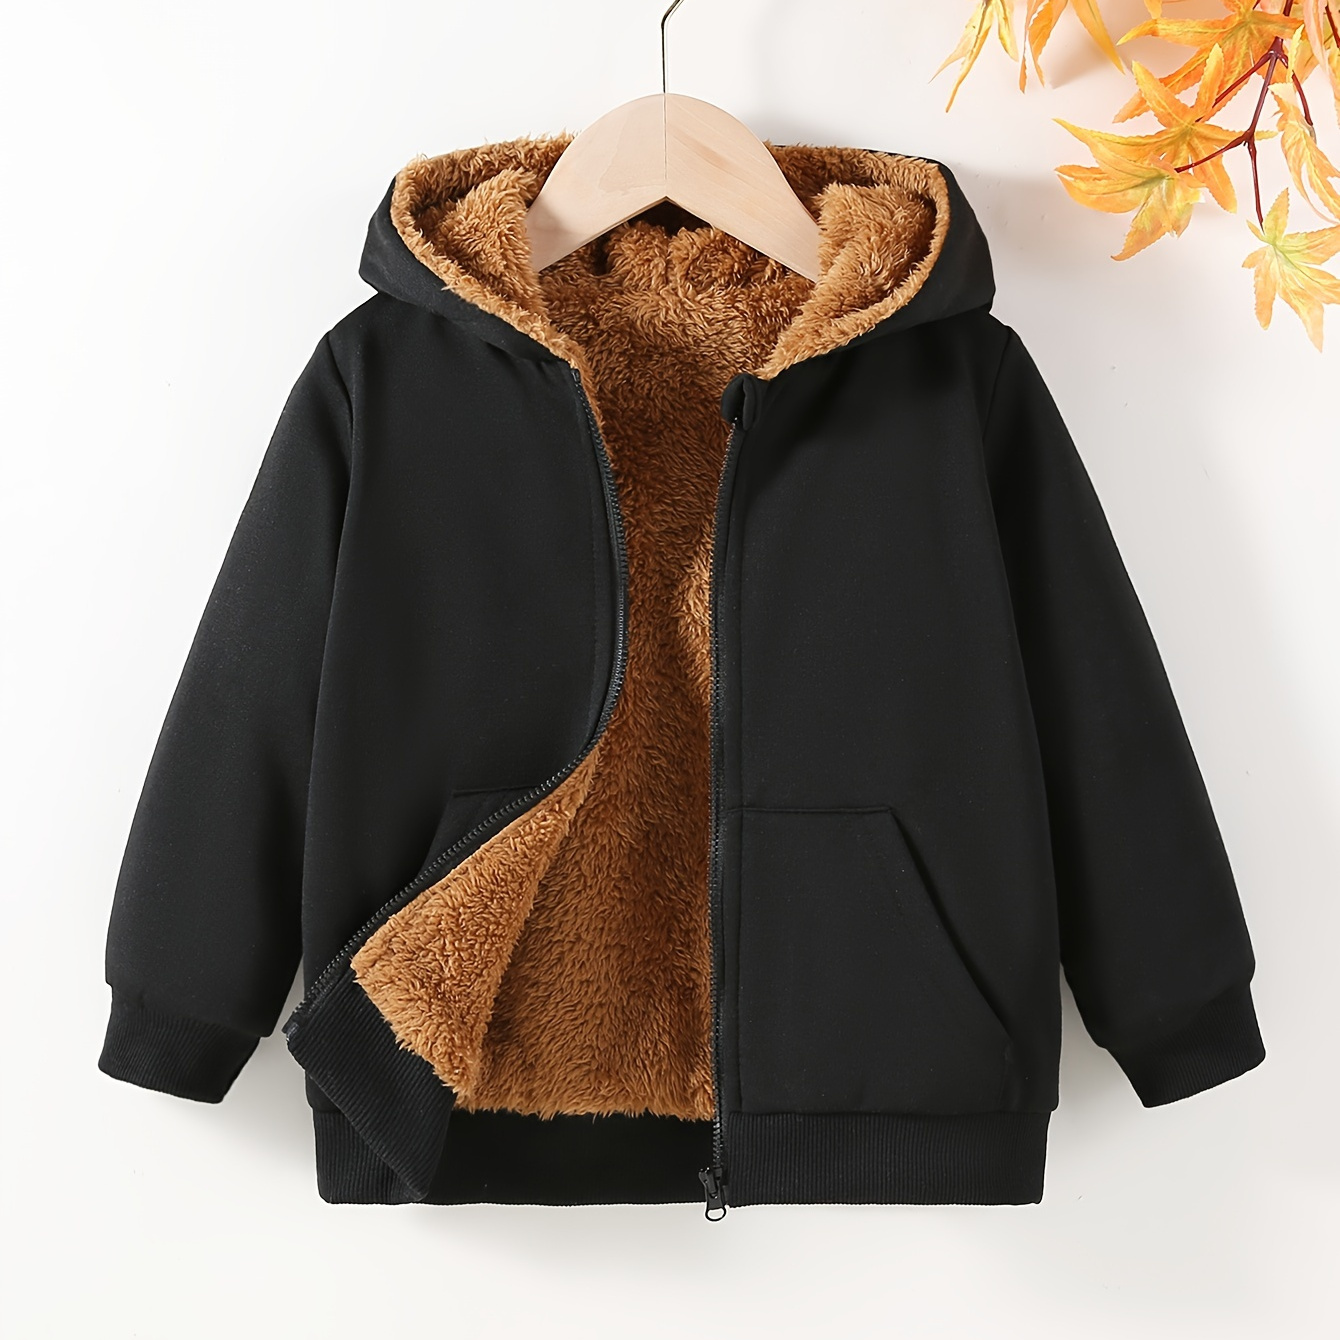 

Kid's Solid Color Fleece Lining Jacket, Warm Zip Up Hooded Coat, Boy's Clothes For Fall Winter Outdoor, As Gift